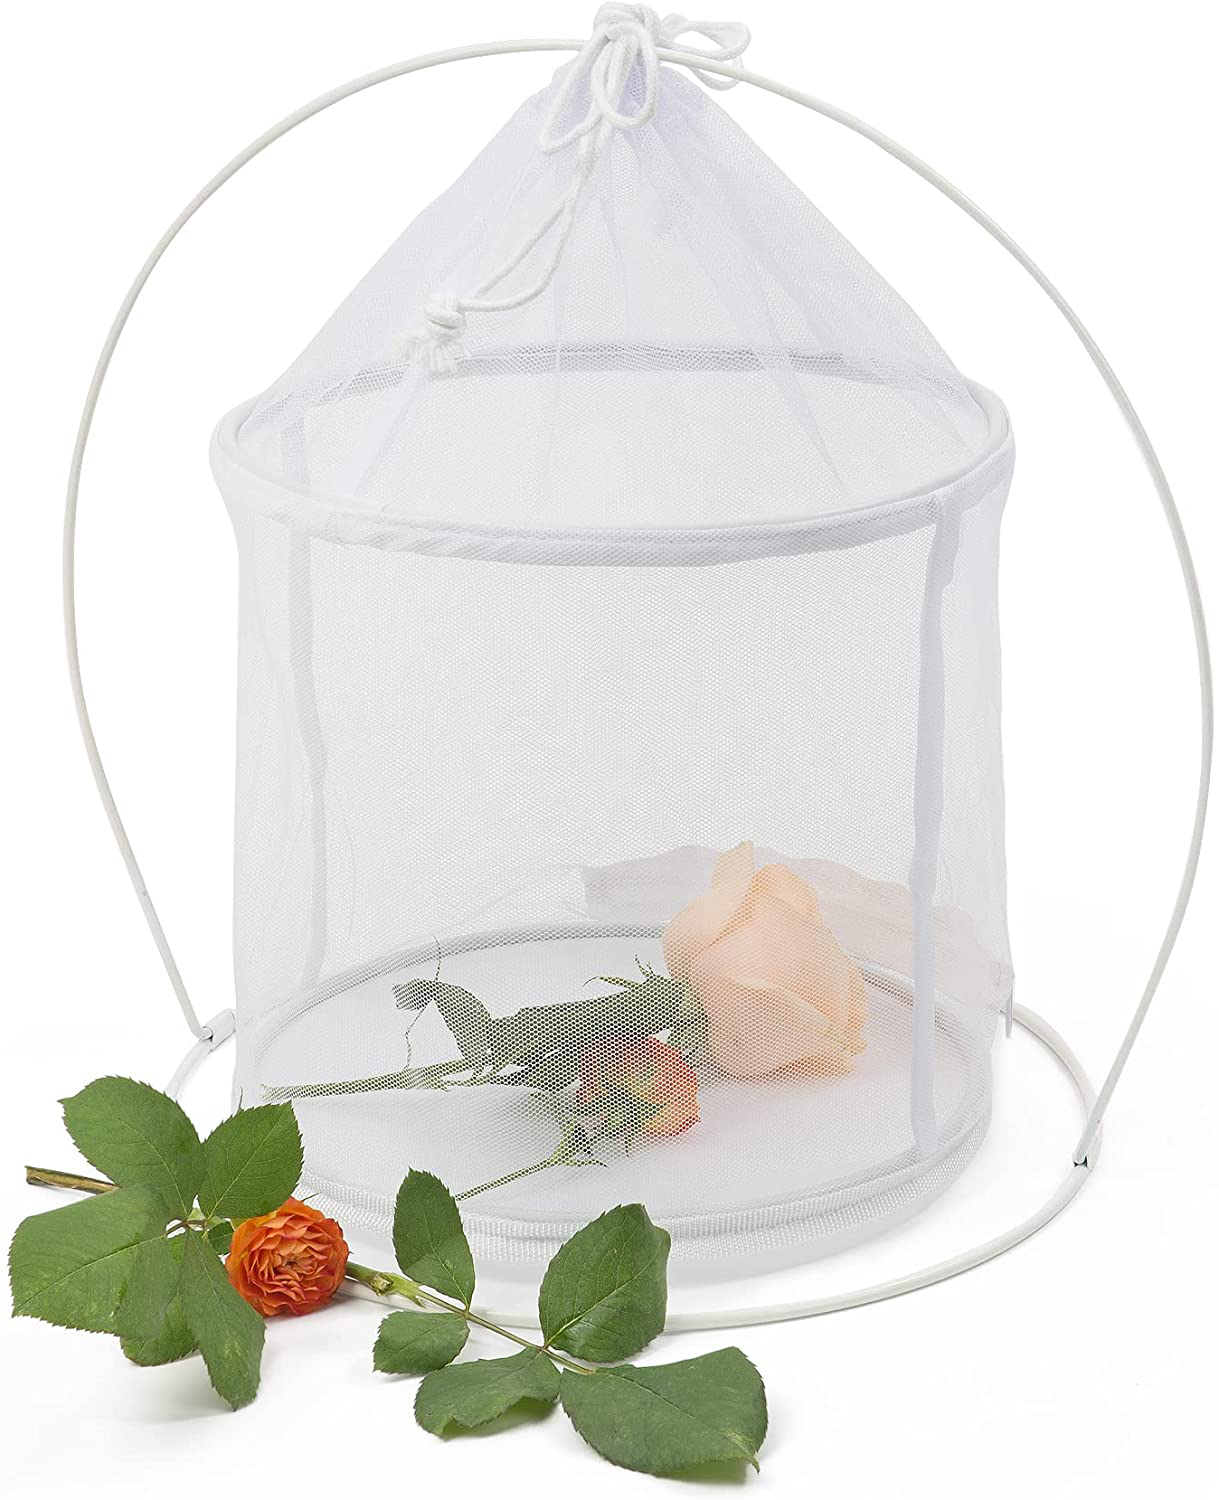 Cute Butterfly Habitat, Insect Mesh Cage, Caterpillar Enclosure, Critter Cage, Bug Terrarium 9.8 X 12 Inches